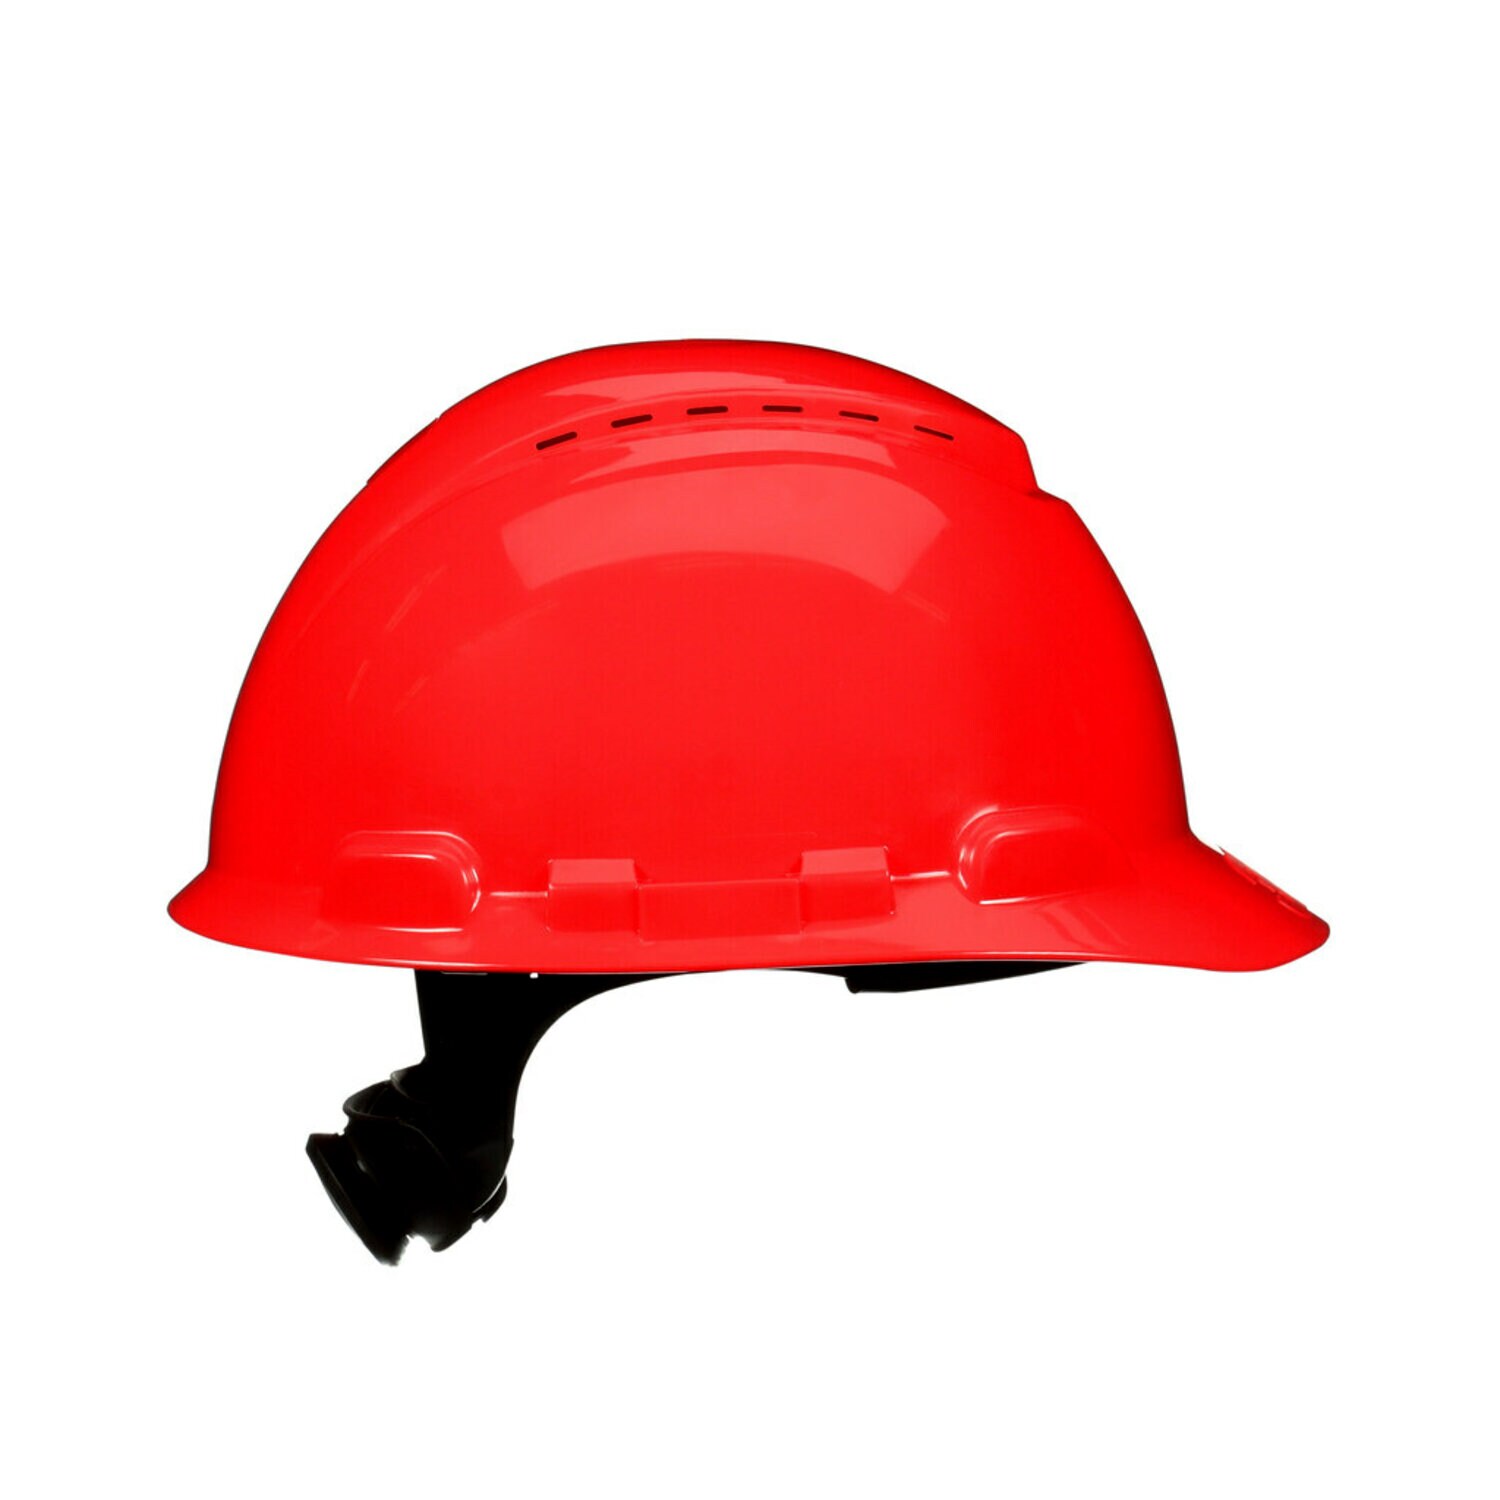 7100240007 - 3M SecureFit Hard Hat H-705SFV-UV, Red, Vented, 4-Point Pressure Diffusion Ratchet Suspension, with Uvicator, 20 ea/Case